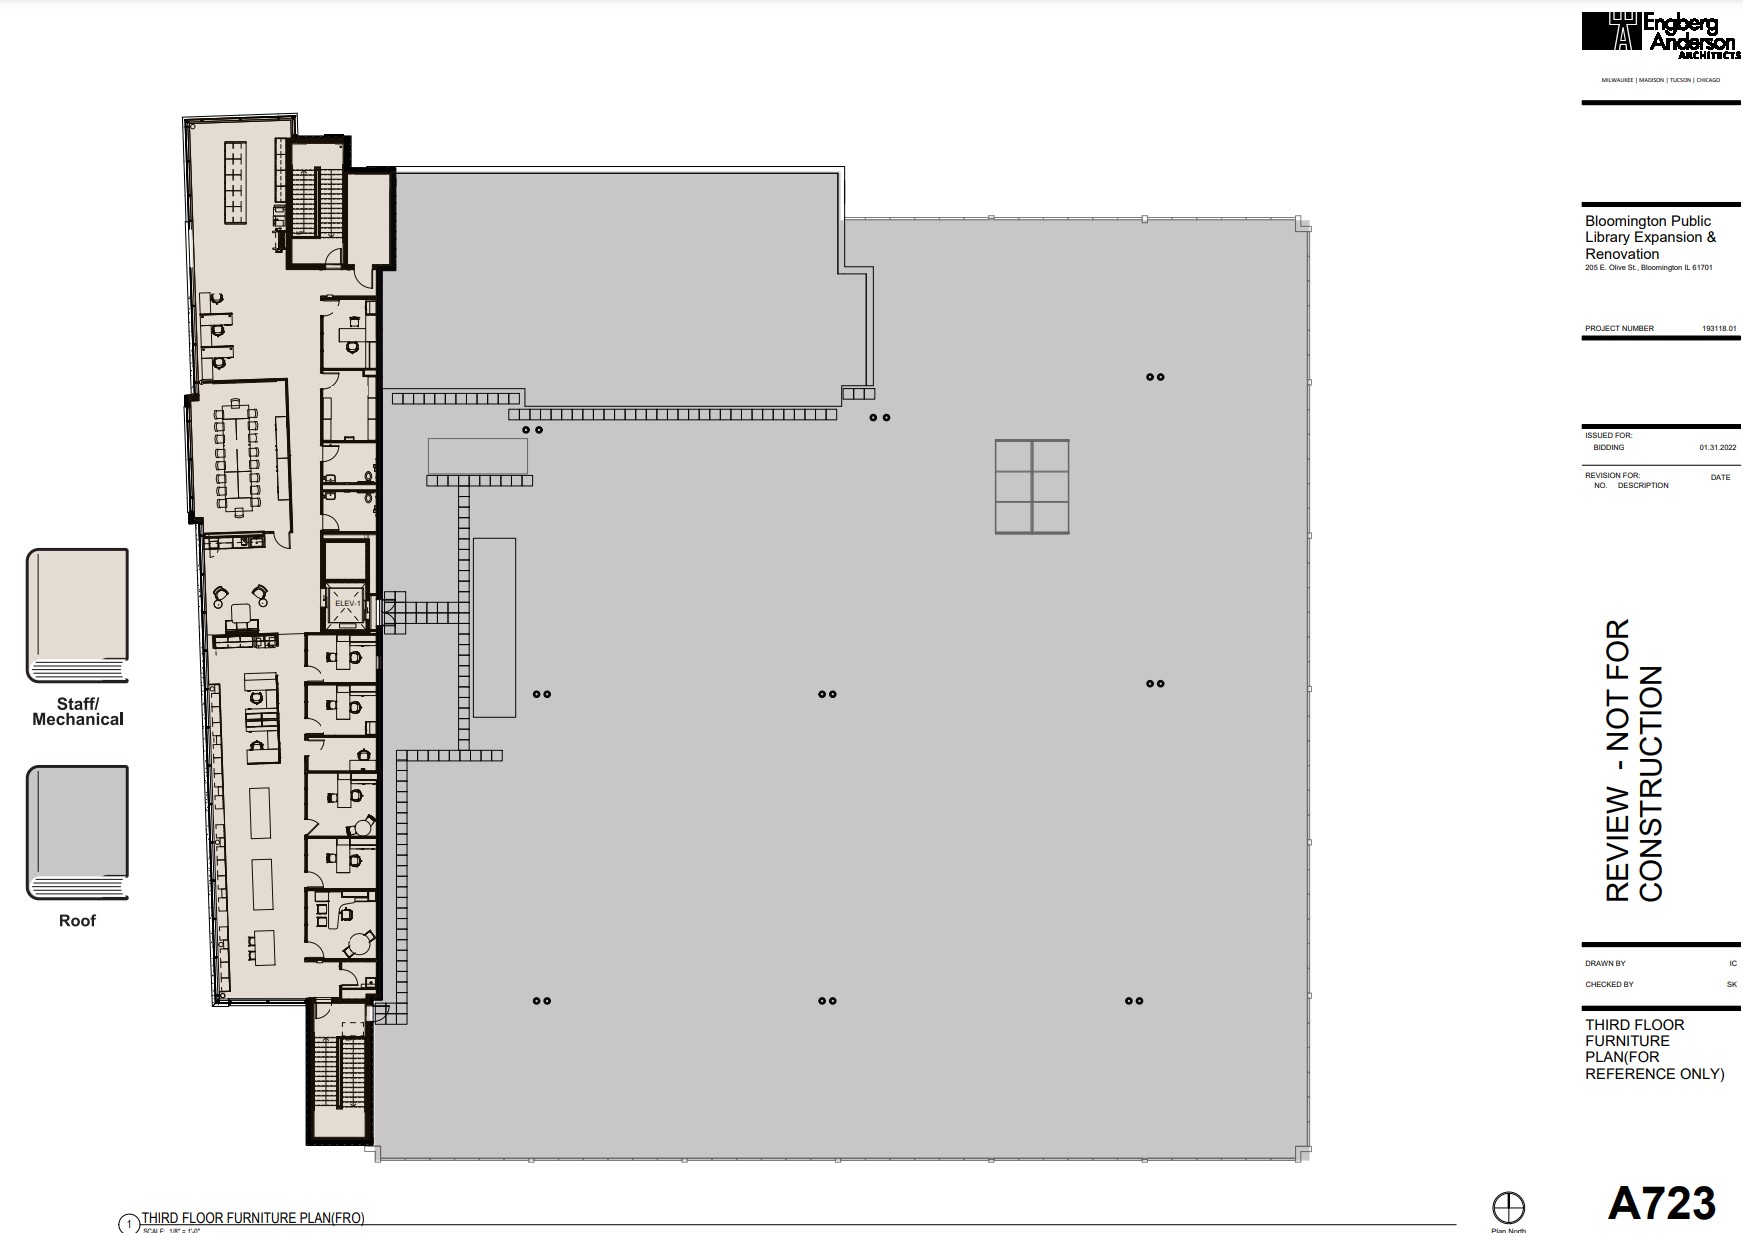 Proposed 3rd floor layout